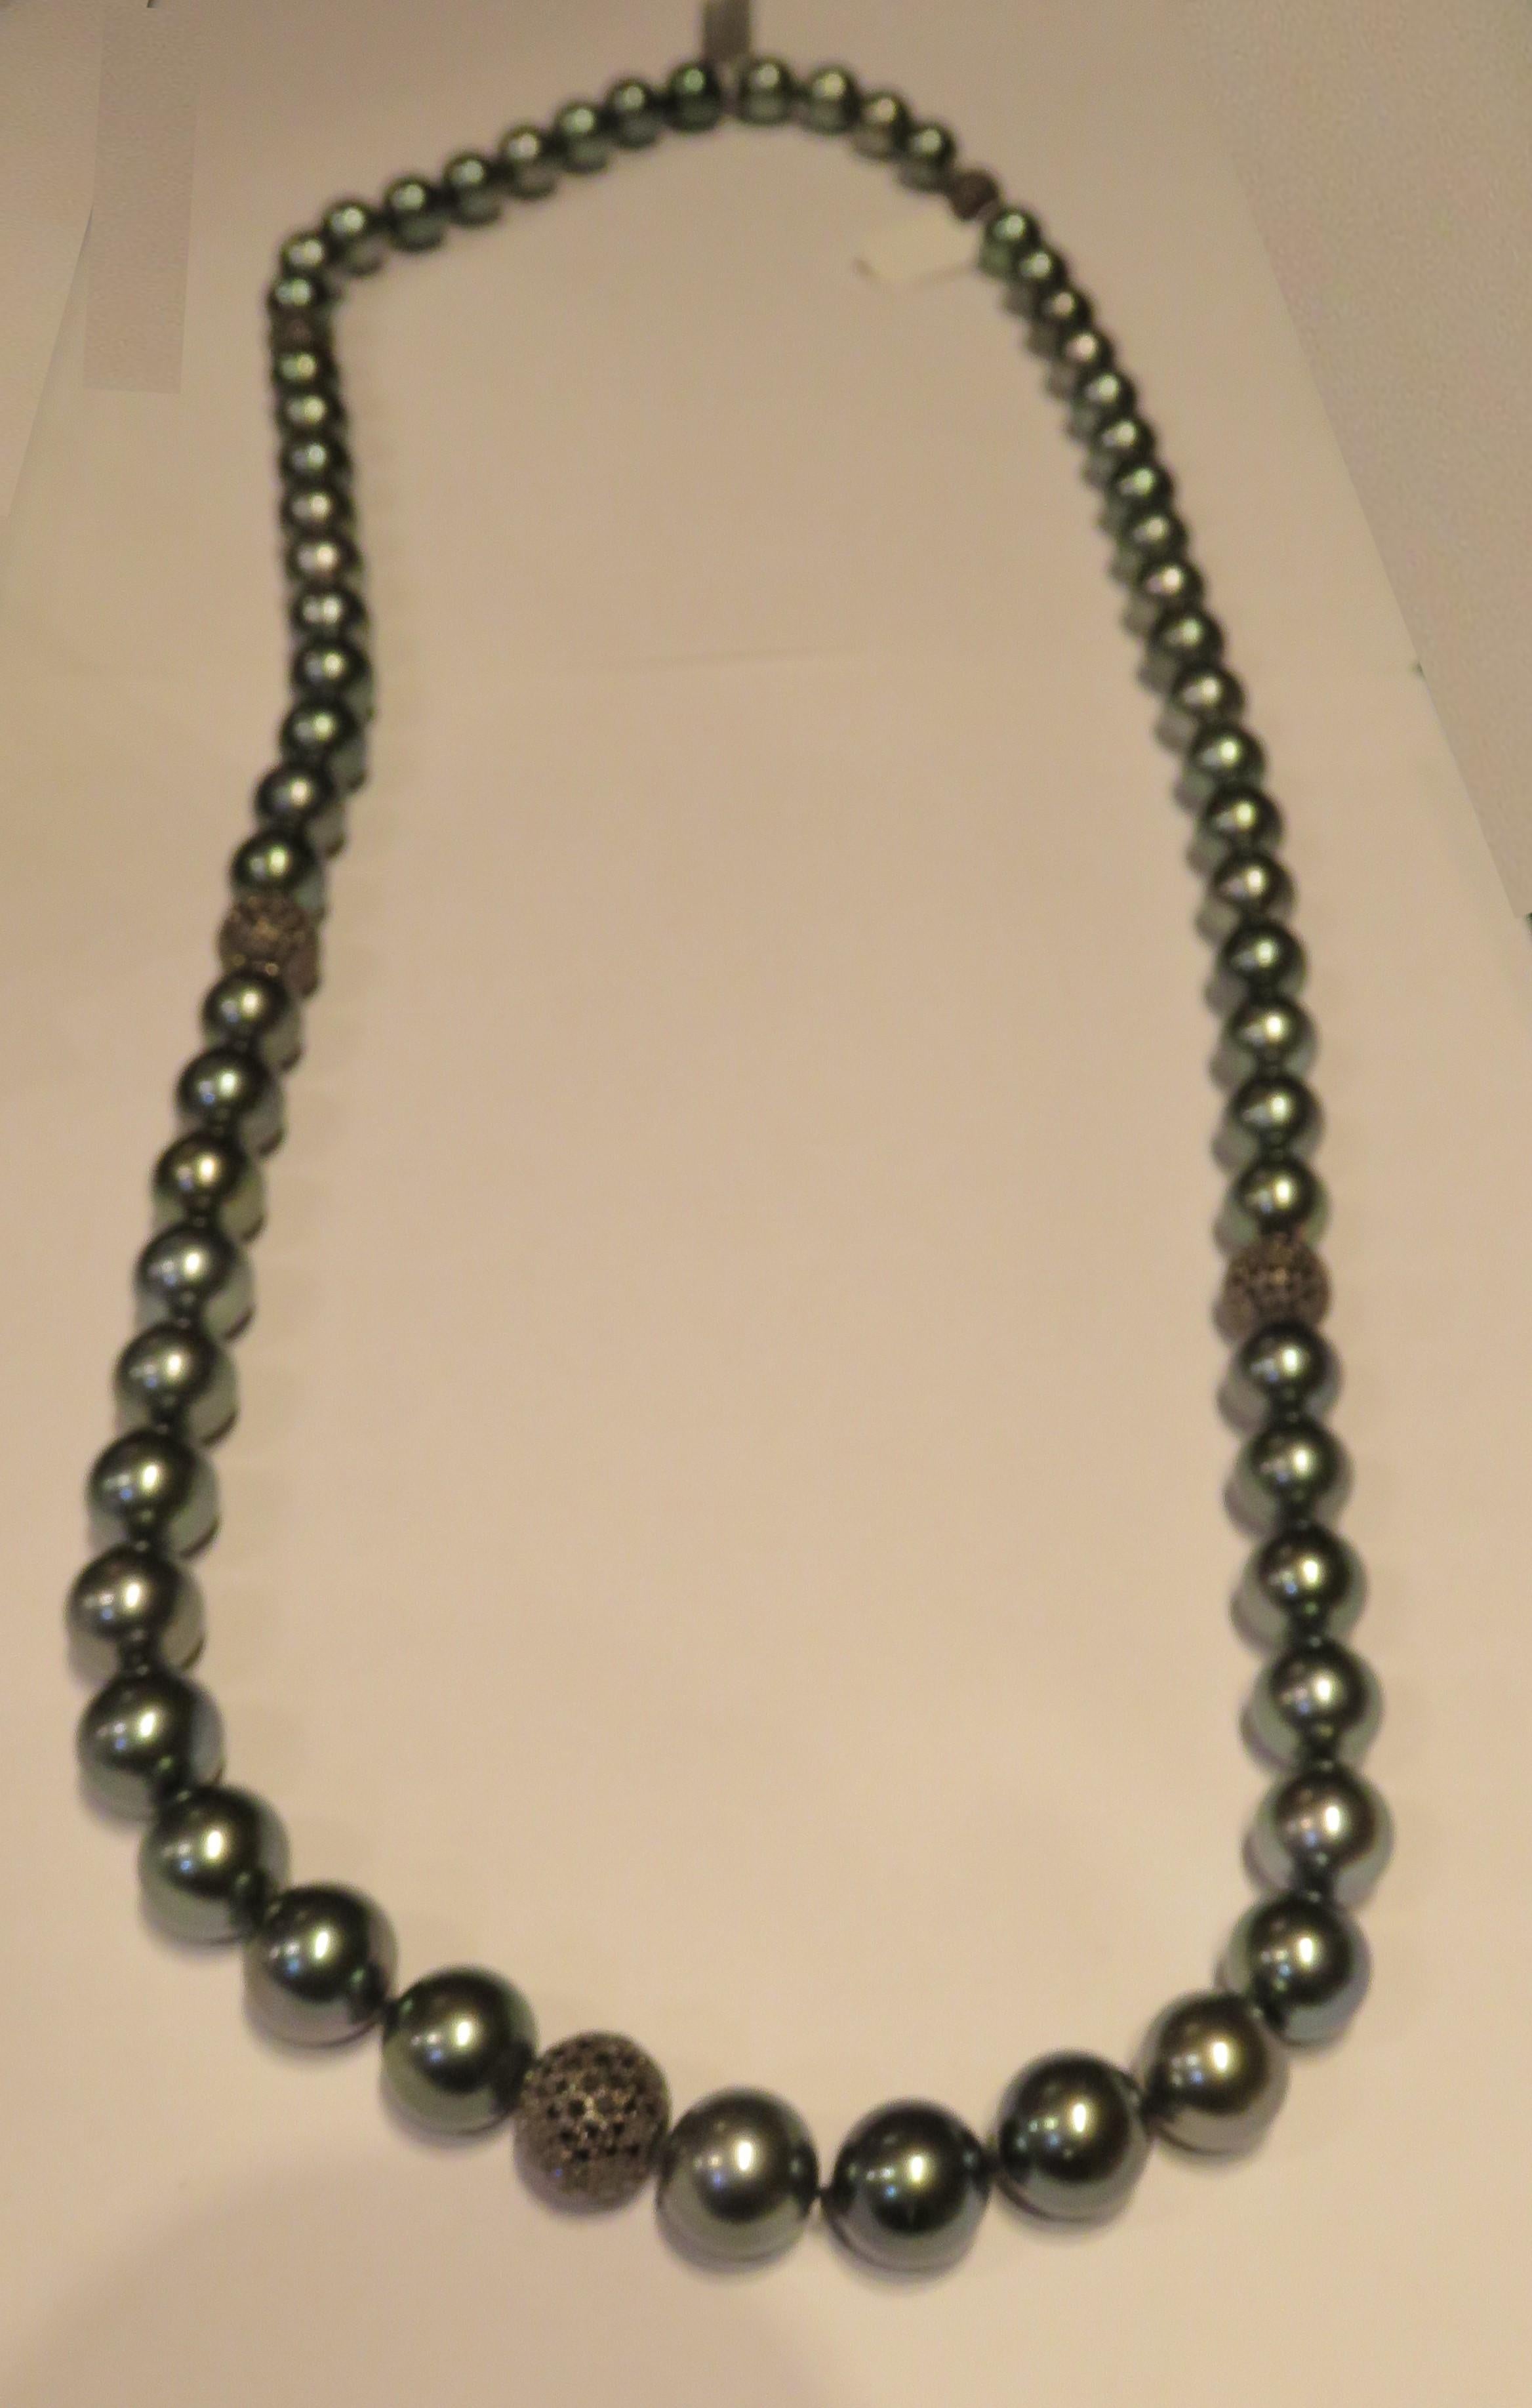 The Following Item we are offering is this Beautiful Rare Important 18KT White Gold Pearl and Diamond Necklace. Bracelet is comprised of 62 Beautiful Magnificent High Luster Fancy Black Tahitian SOUTH SEA PEARLS that give off a Radiant Hue!!!